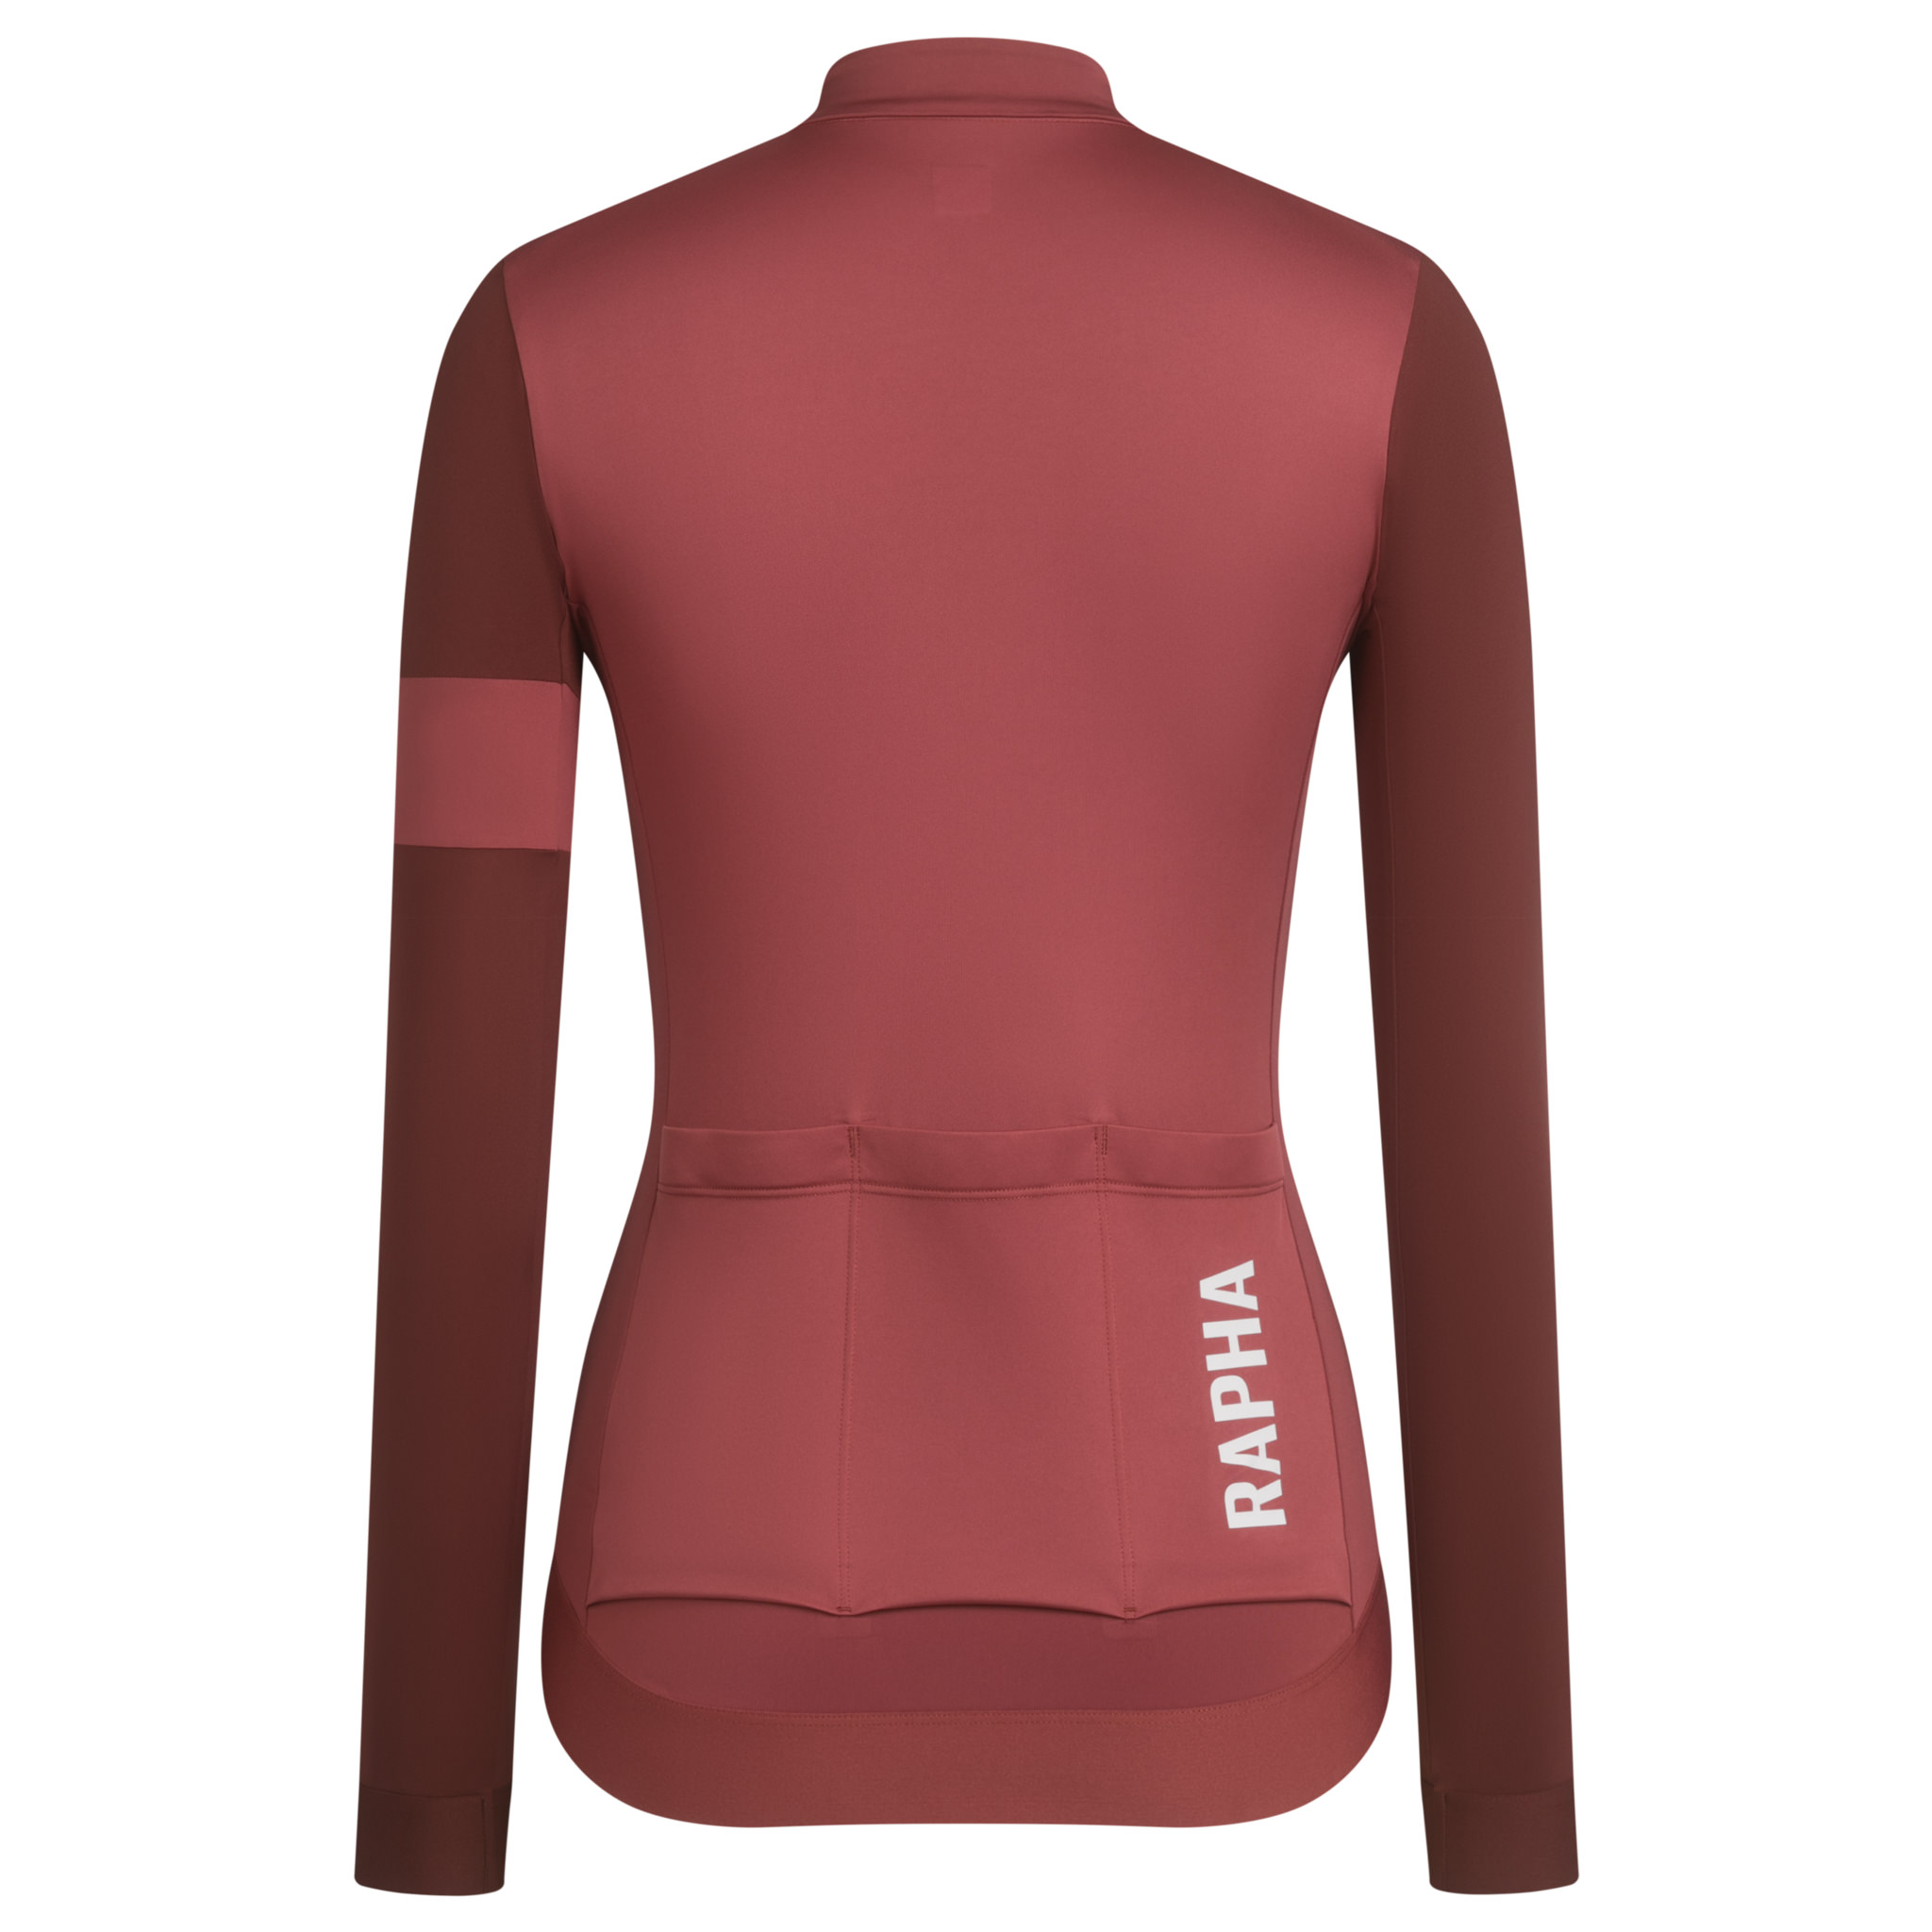 Women's Pro Team Long Sleeve Training Jersey | Cycling Top For 